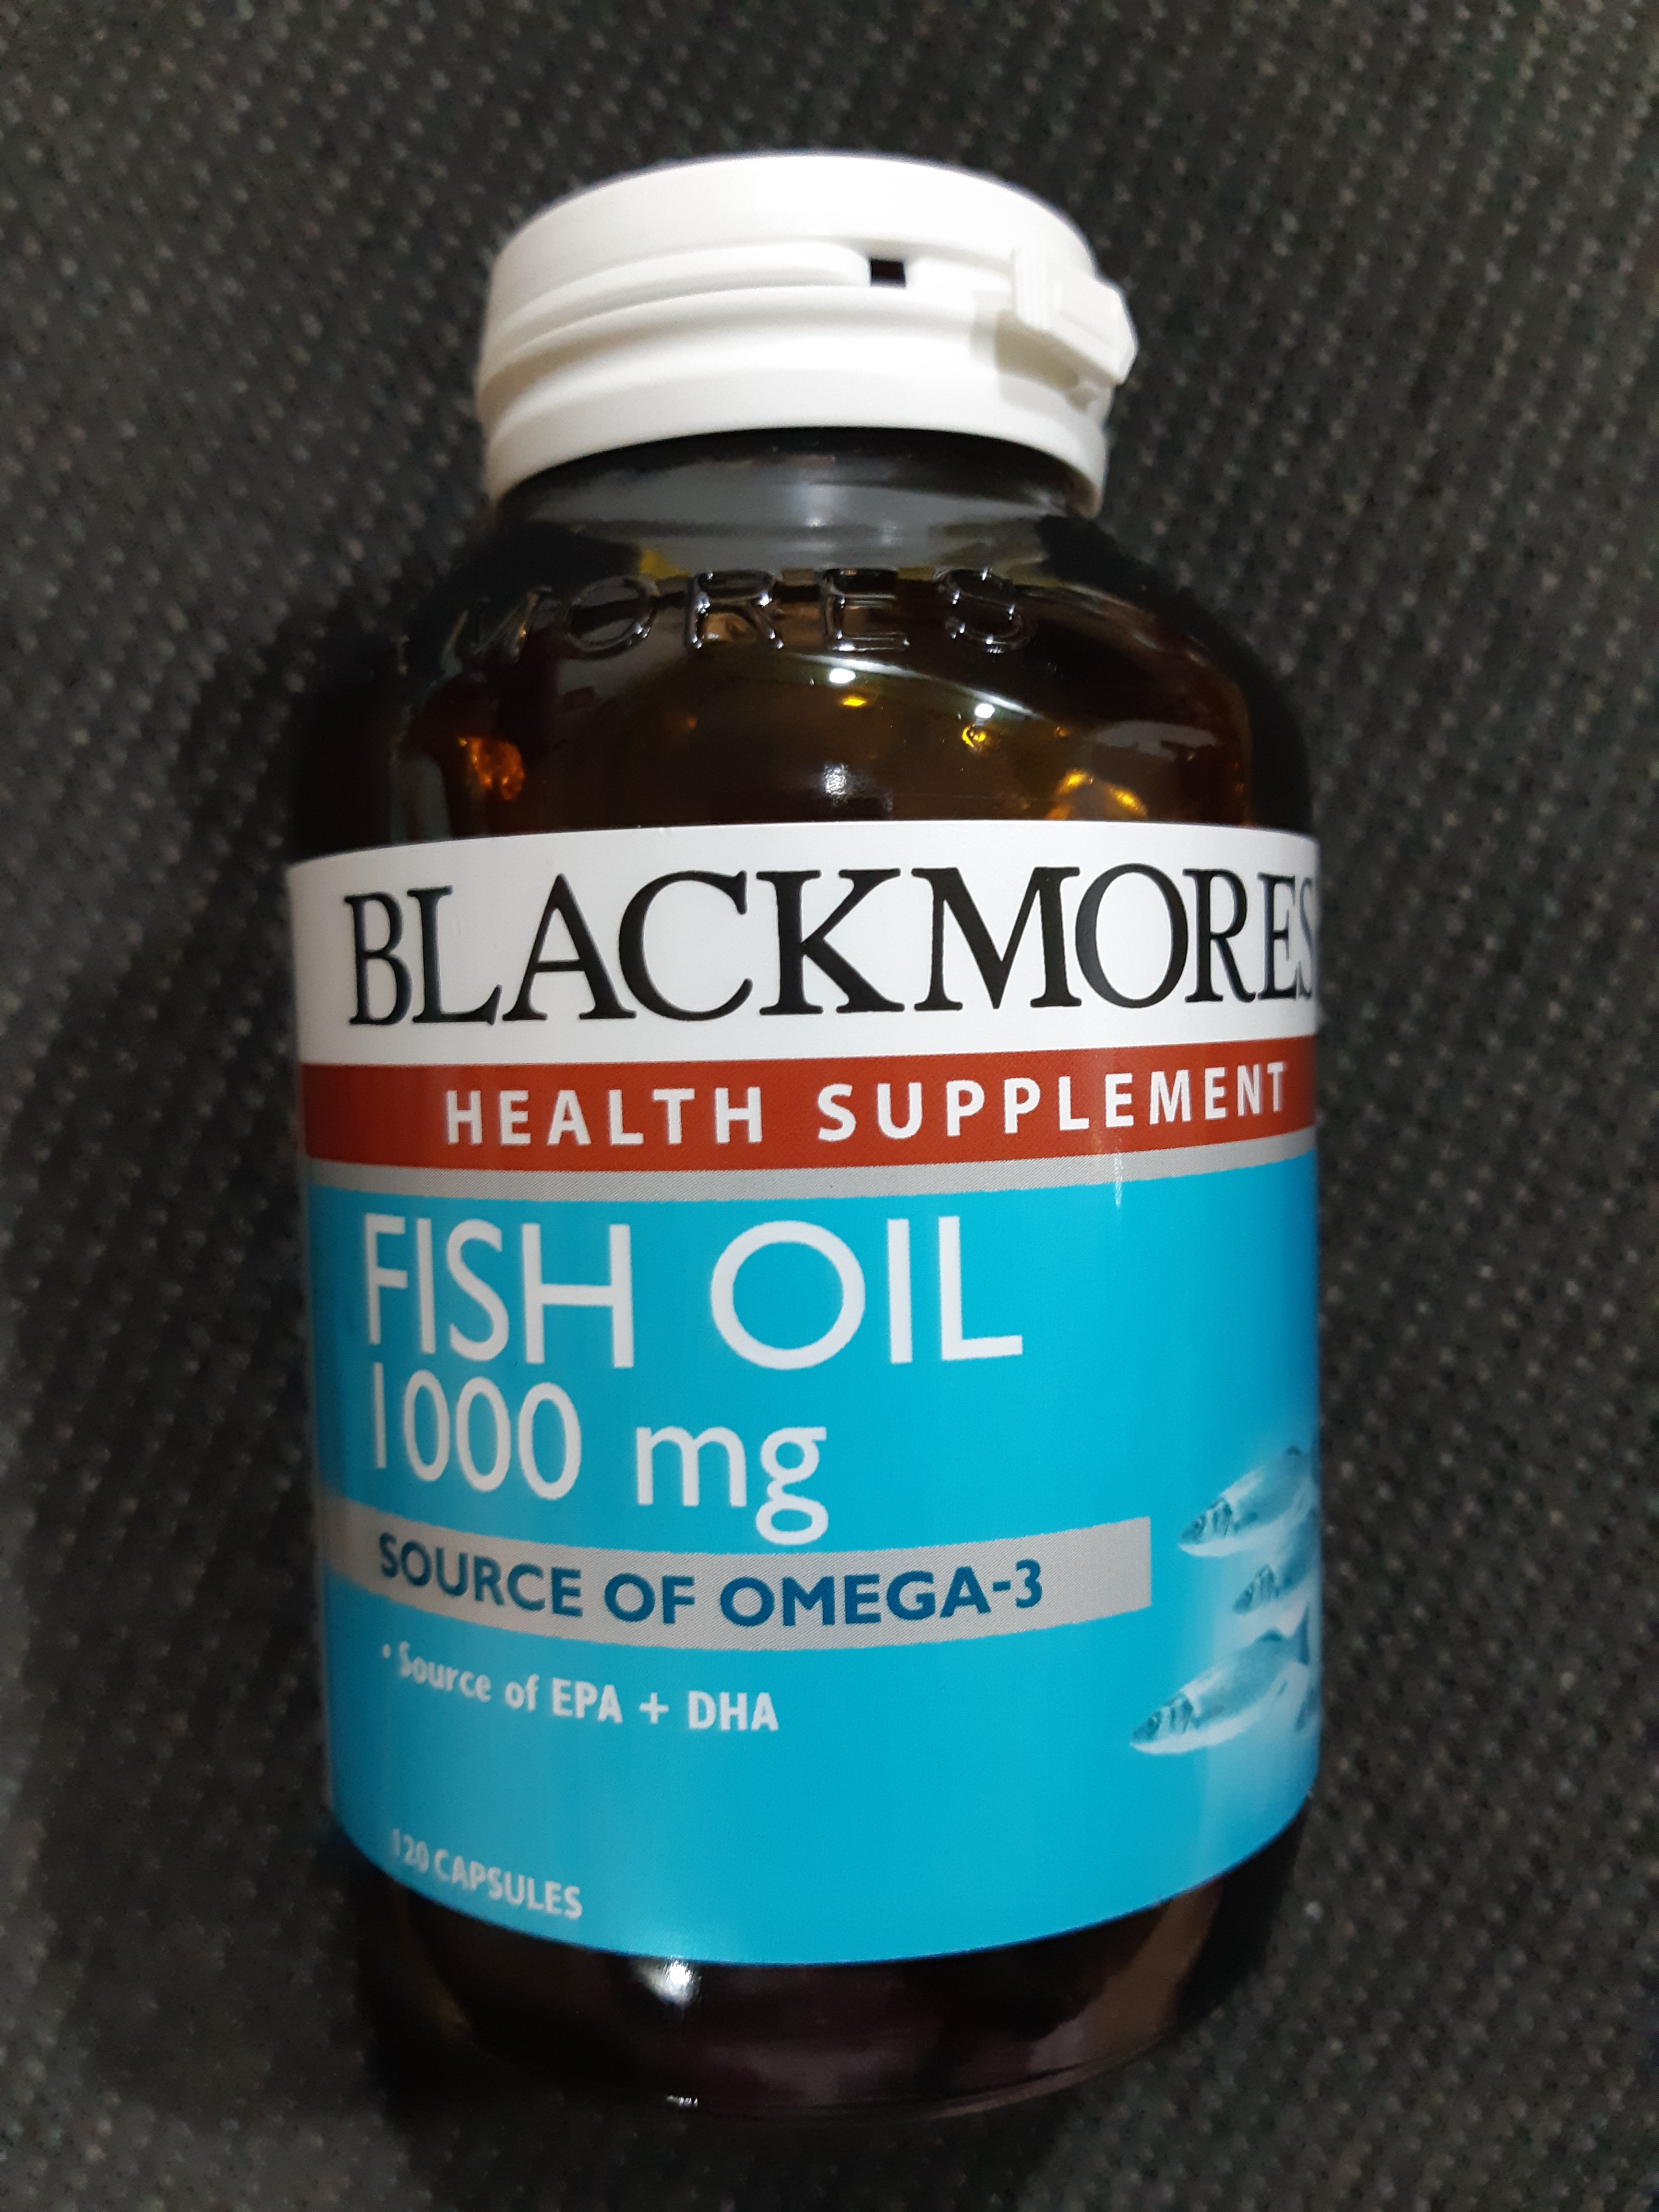 Blackmore Fish Oil 1000 Natural Source Of Omega 3 1capsule Health Nutrition Health Supplements Vitamins Supplements On Carousell